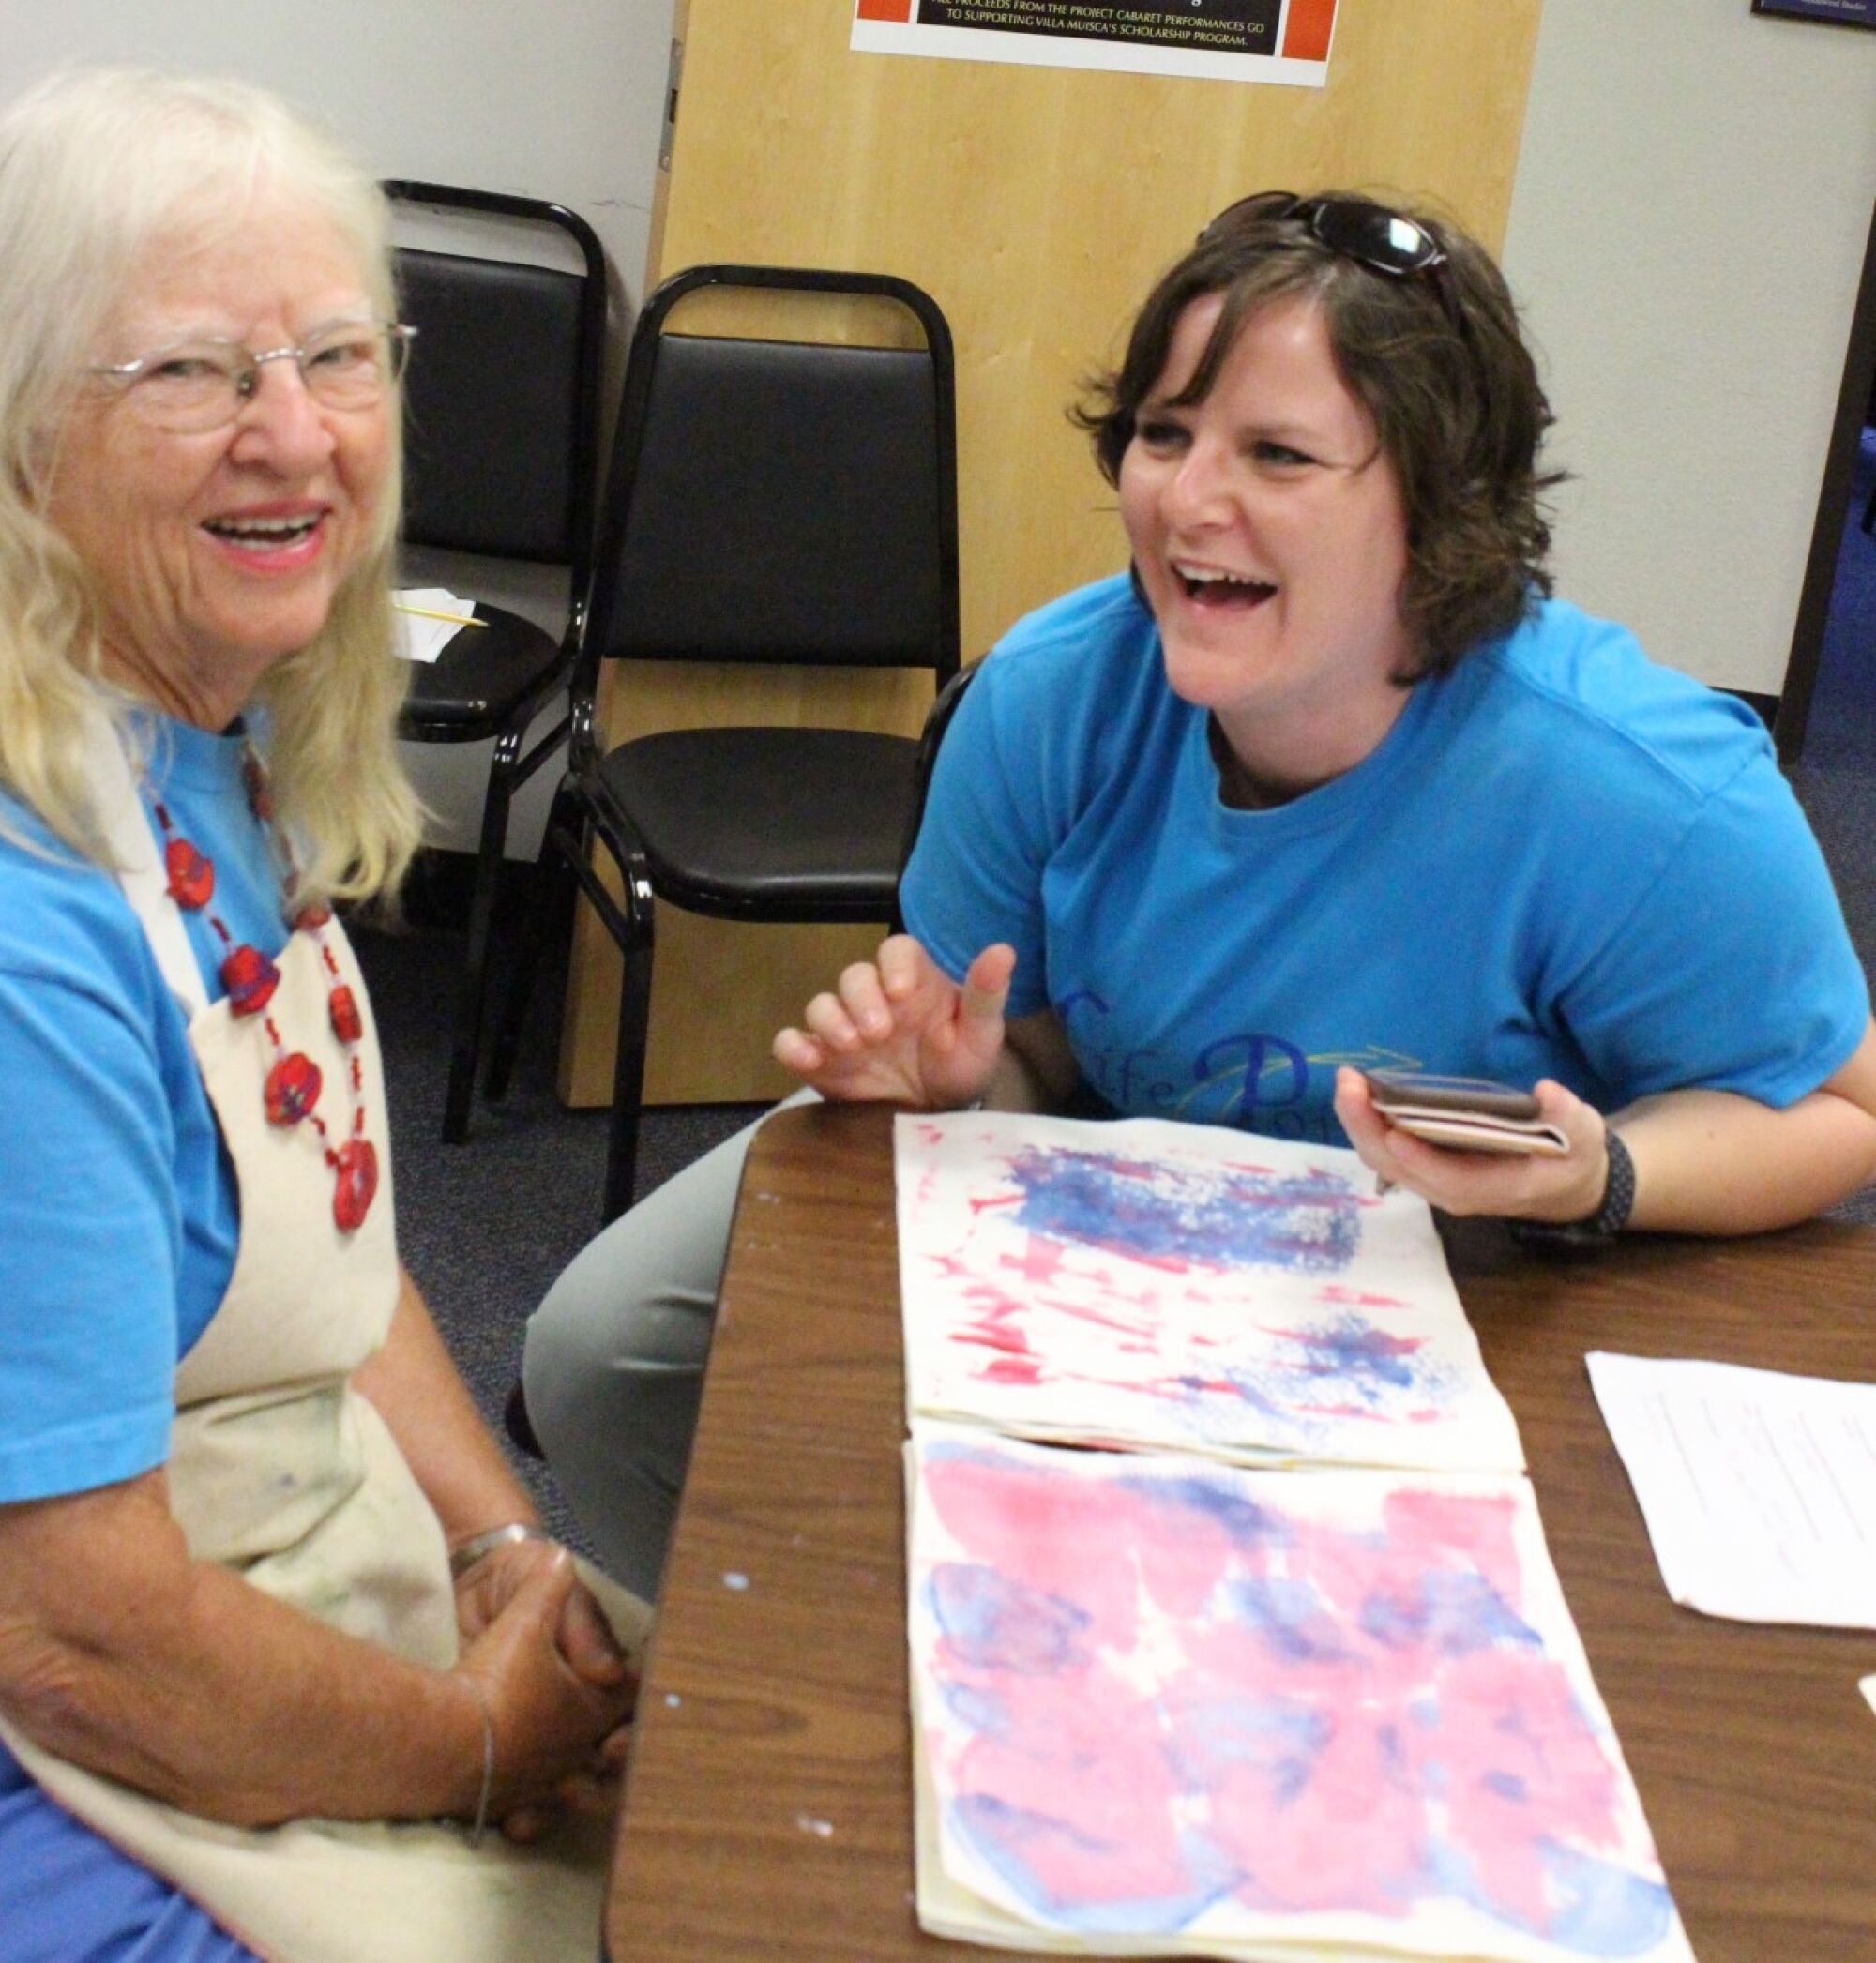 Musical biography student Sherry (whose last name is witheld to protect her privacy) works with music therapist Audra Munoz on a scrapbook during a class at Villa Musica.